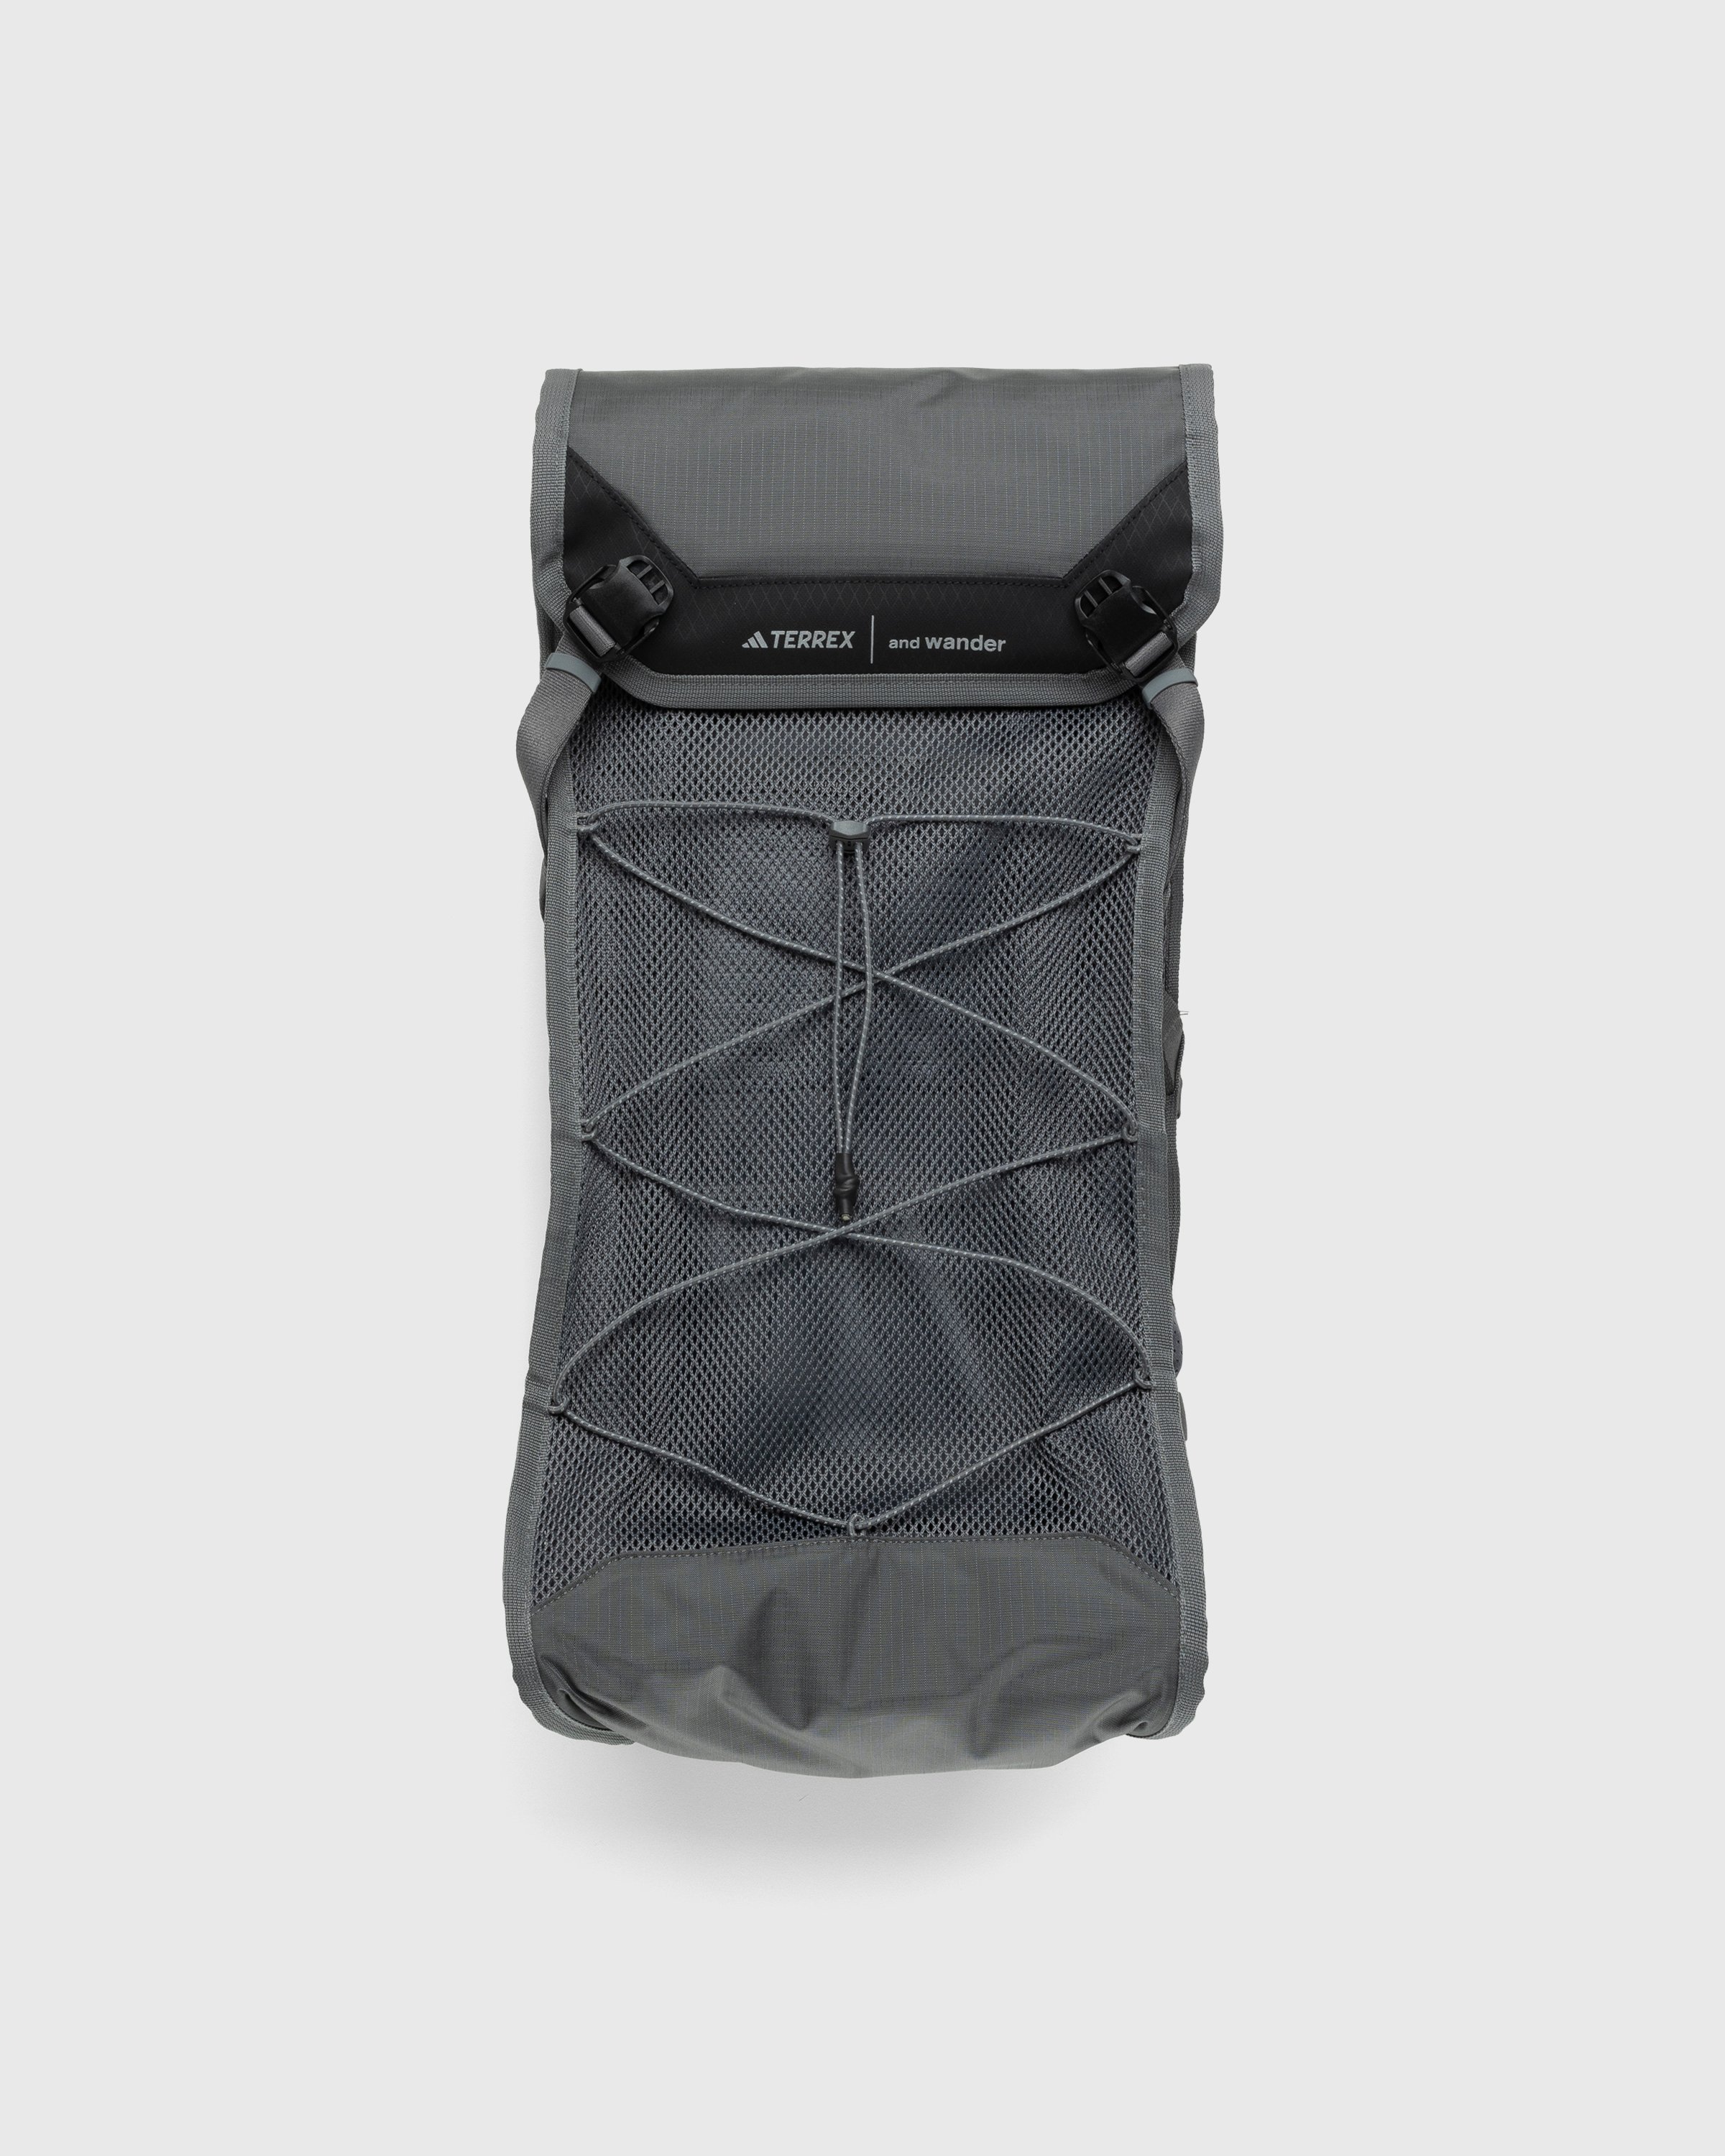 And Wander x Adidas - AEROREADY Backpack Grey Four - Accessories - Grey - Image 1